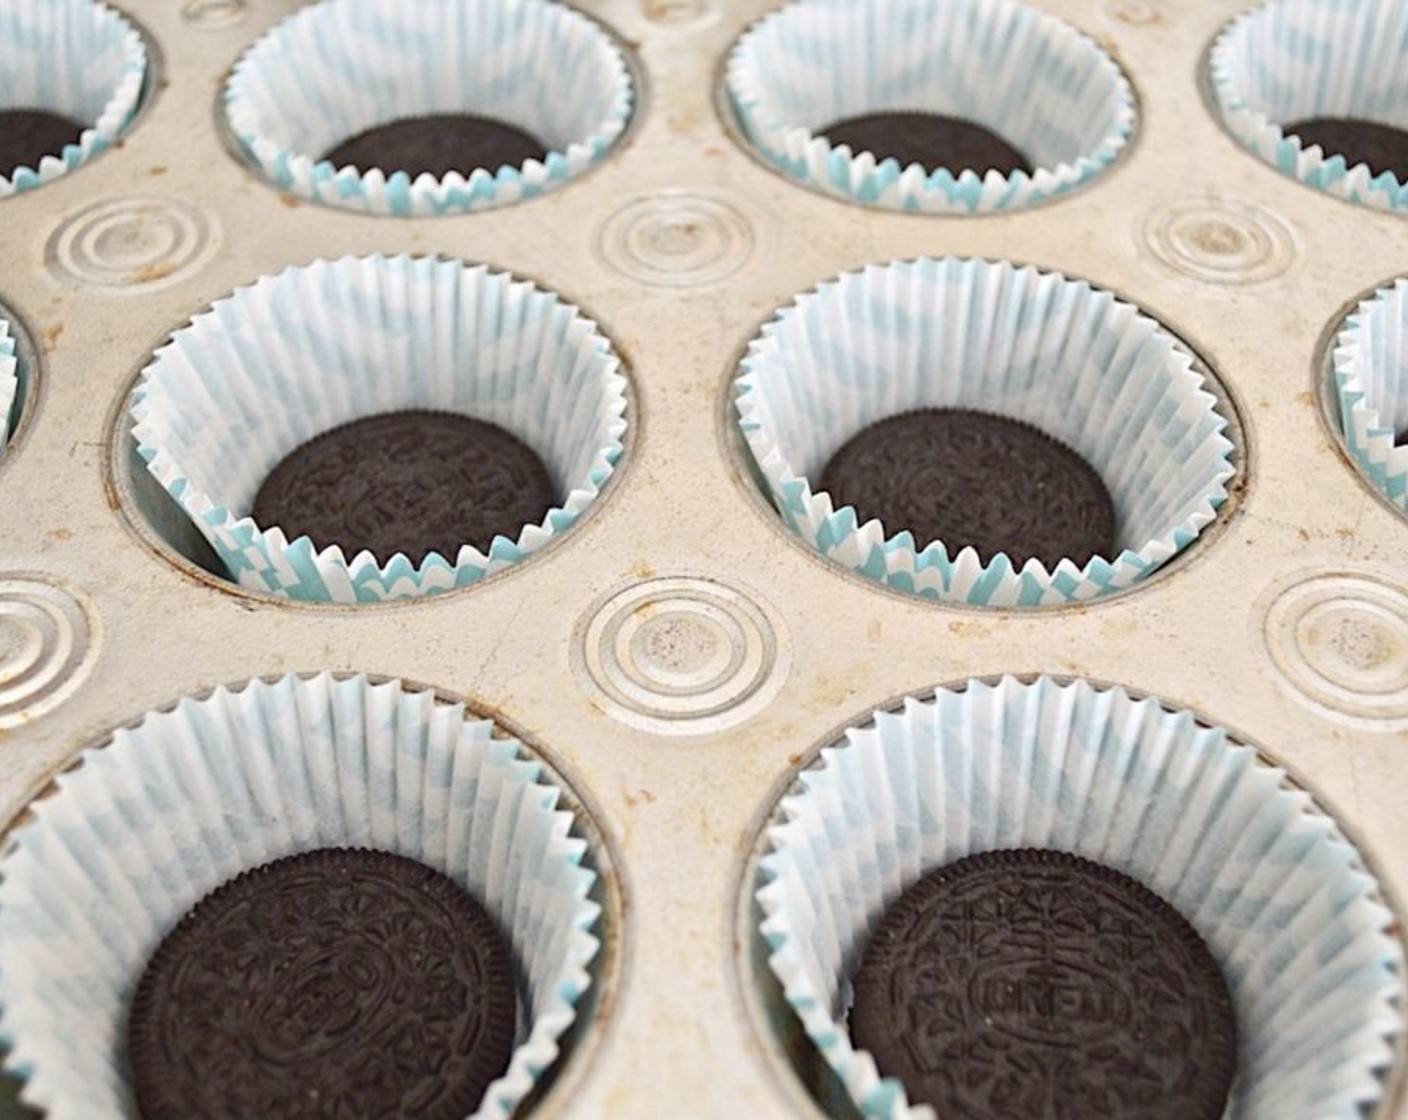 step 2 Get out two muffin tins that can hold 15 cakes total. Line each muffin well with a paper liner and place an Oreo® Chocolate Sandwich Cookies (15) in the bottom of each of the 15 wells.